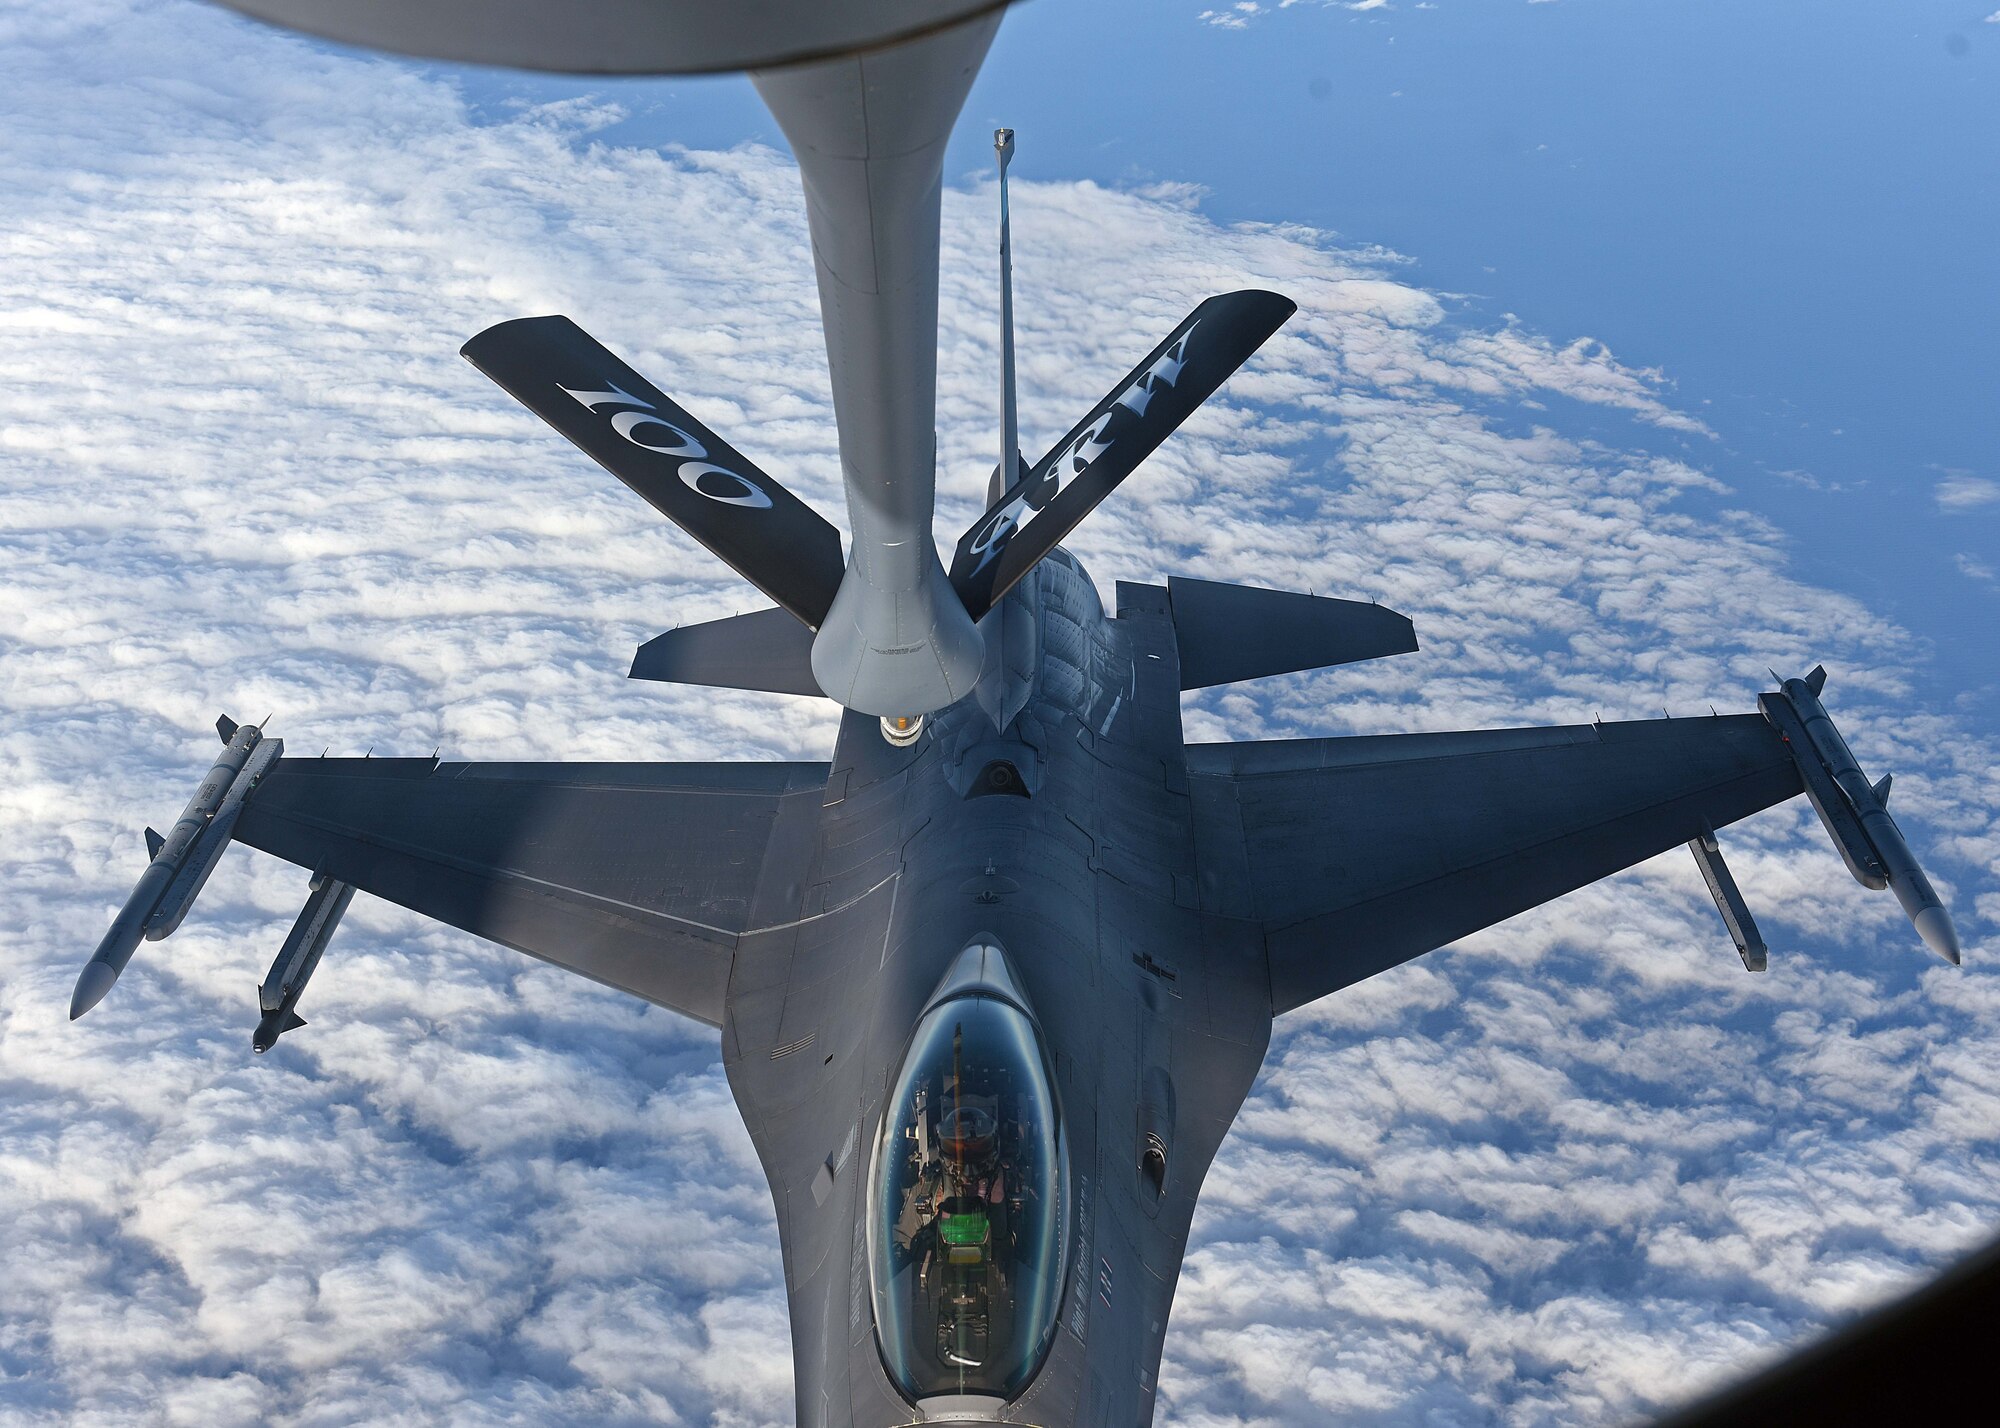 A U.S. Air Force F-16C Fighting Falcon prepares to receive fuel during air refueling training in Swedish airspace, Feb. 8, 2018. The training was in conjunction with a rotational deployment of F-16Cs from the Ohio Air National Guard’s 180th Fighter Wing to Amari Air Base, Estonia, as part of a Theater Security Package. (U.S. Air Force photo by Airman 1st Class Luke Milano)